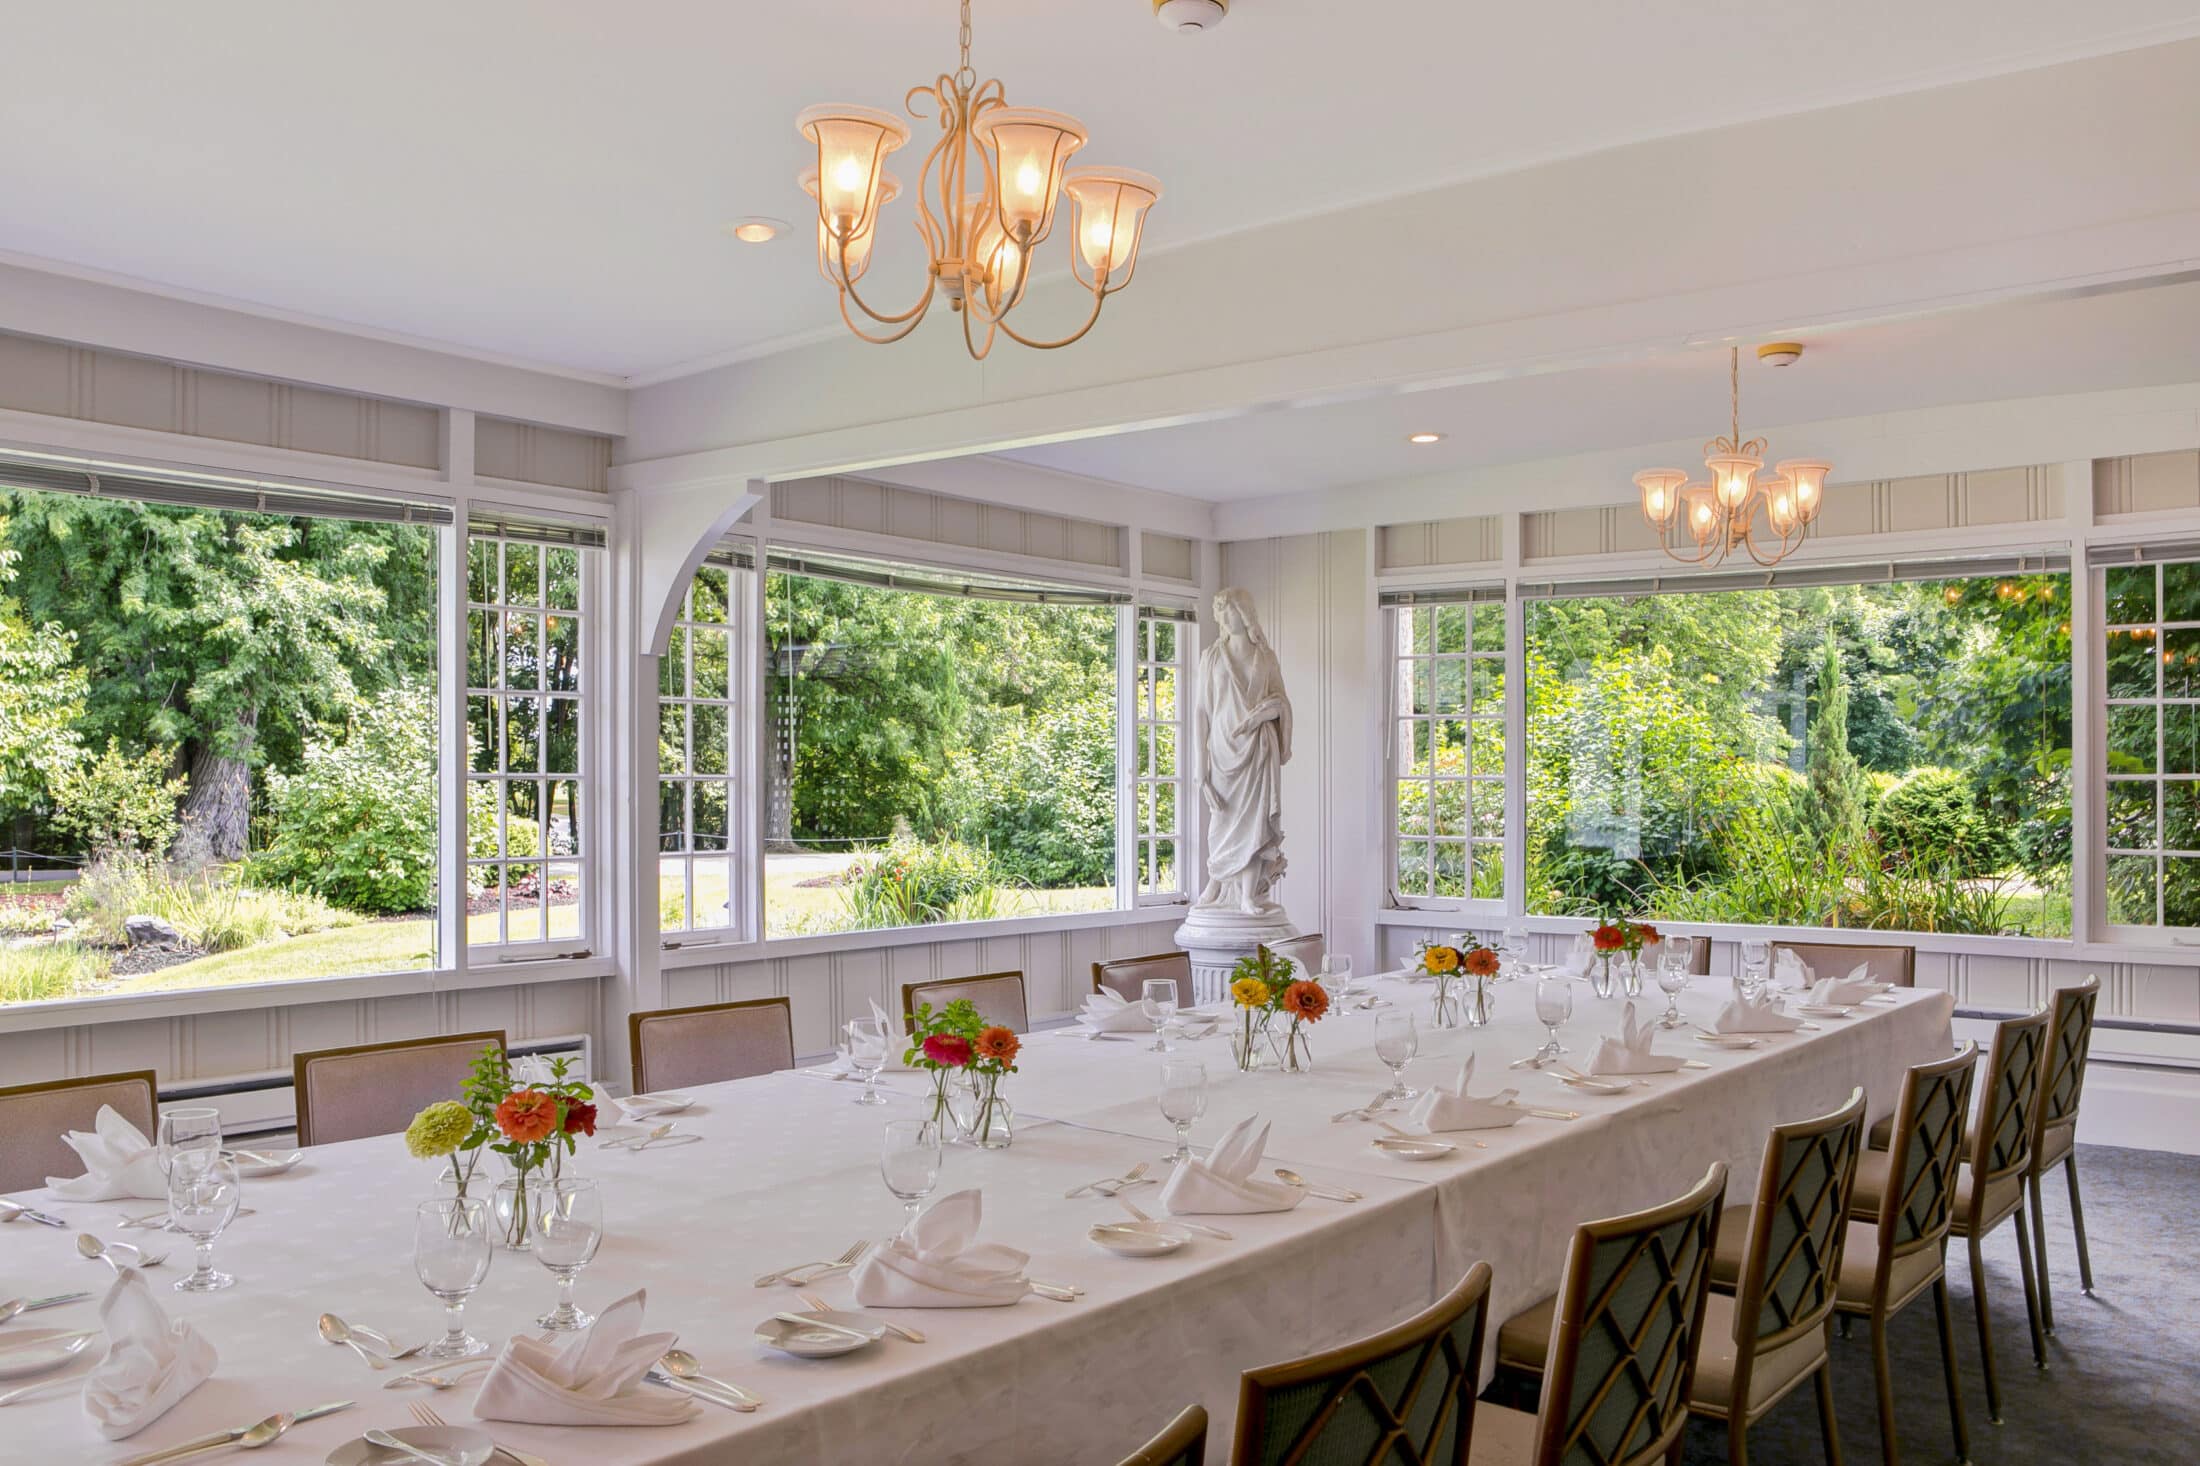 Family style table in the Garden Room with large windows overlooking the lush Chef's Garden